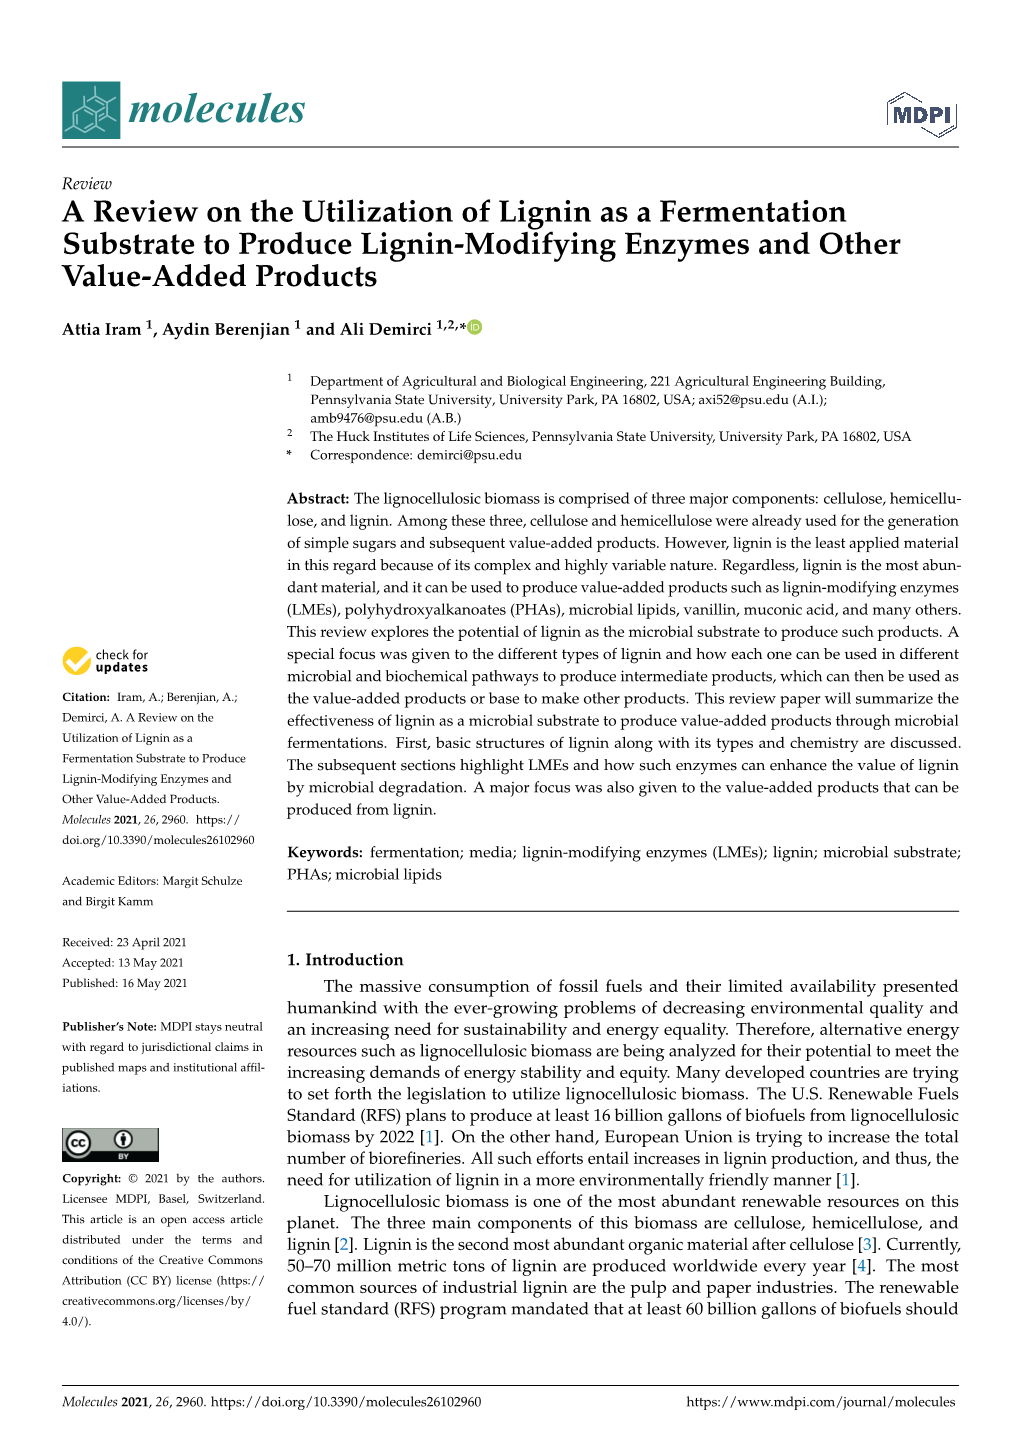 A Review on the Utilization of Lignin As a Fermentation Substrate to Produce Lignin-Modifying Enzymes and Other Value-Added Products